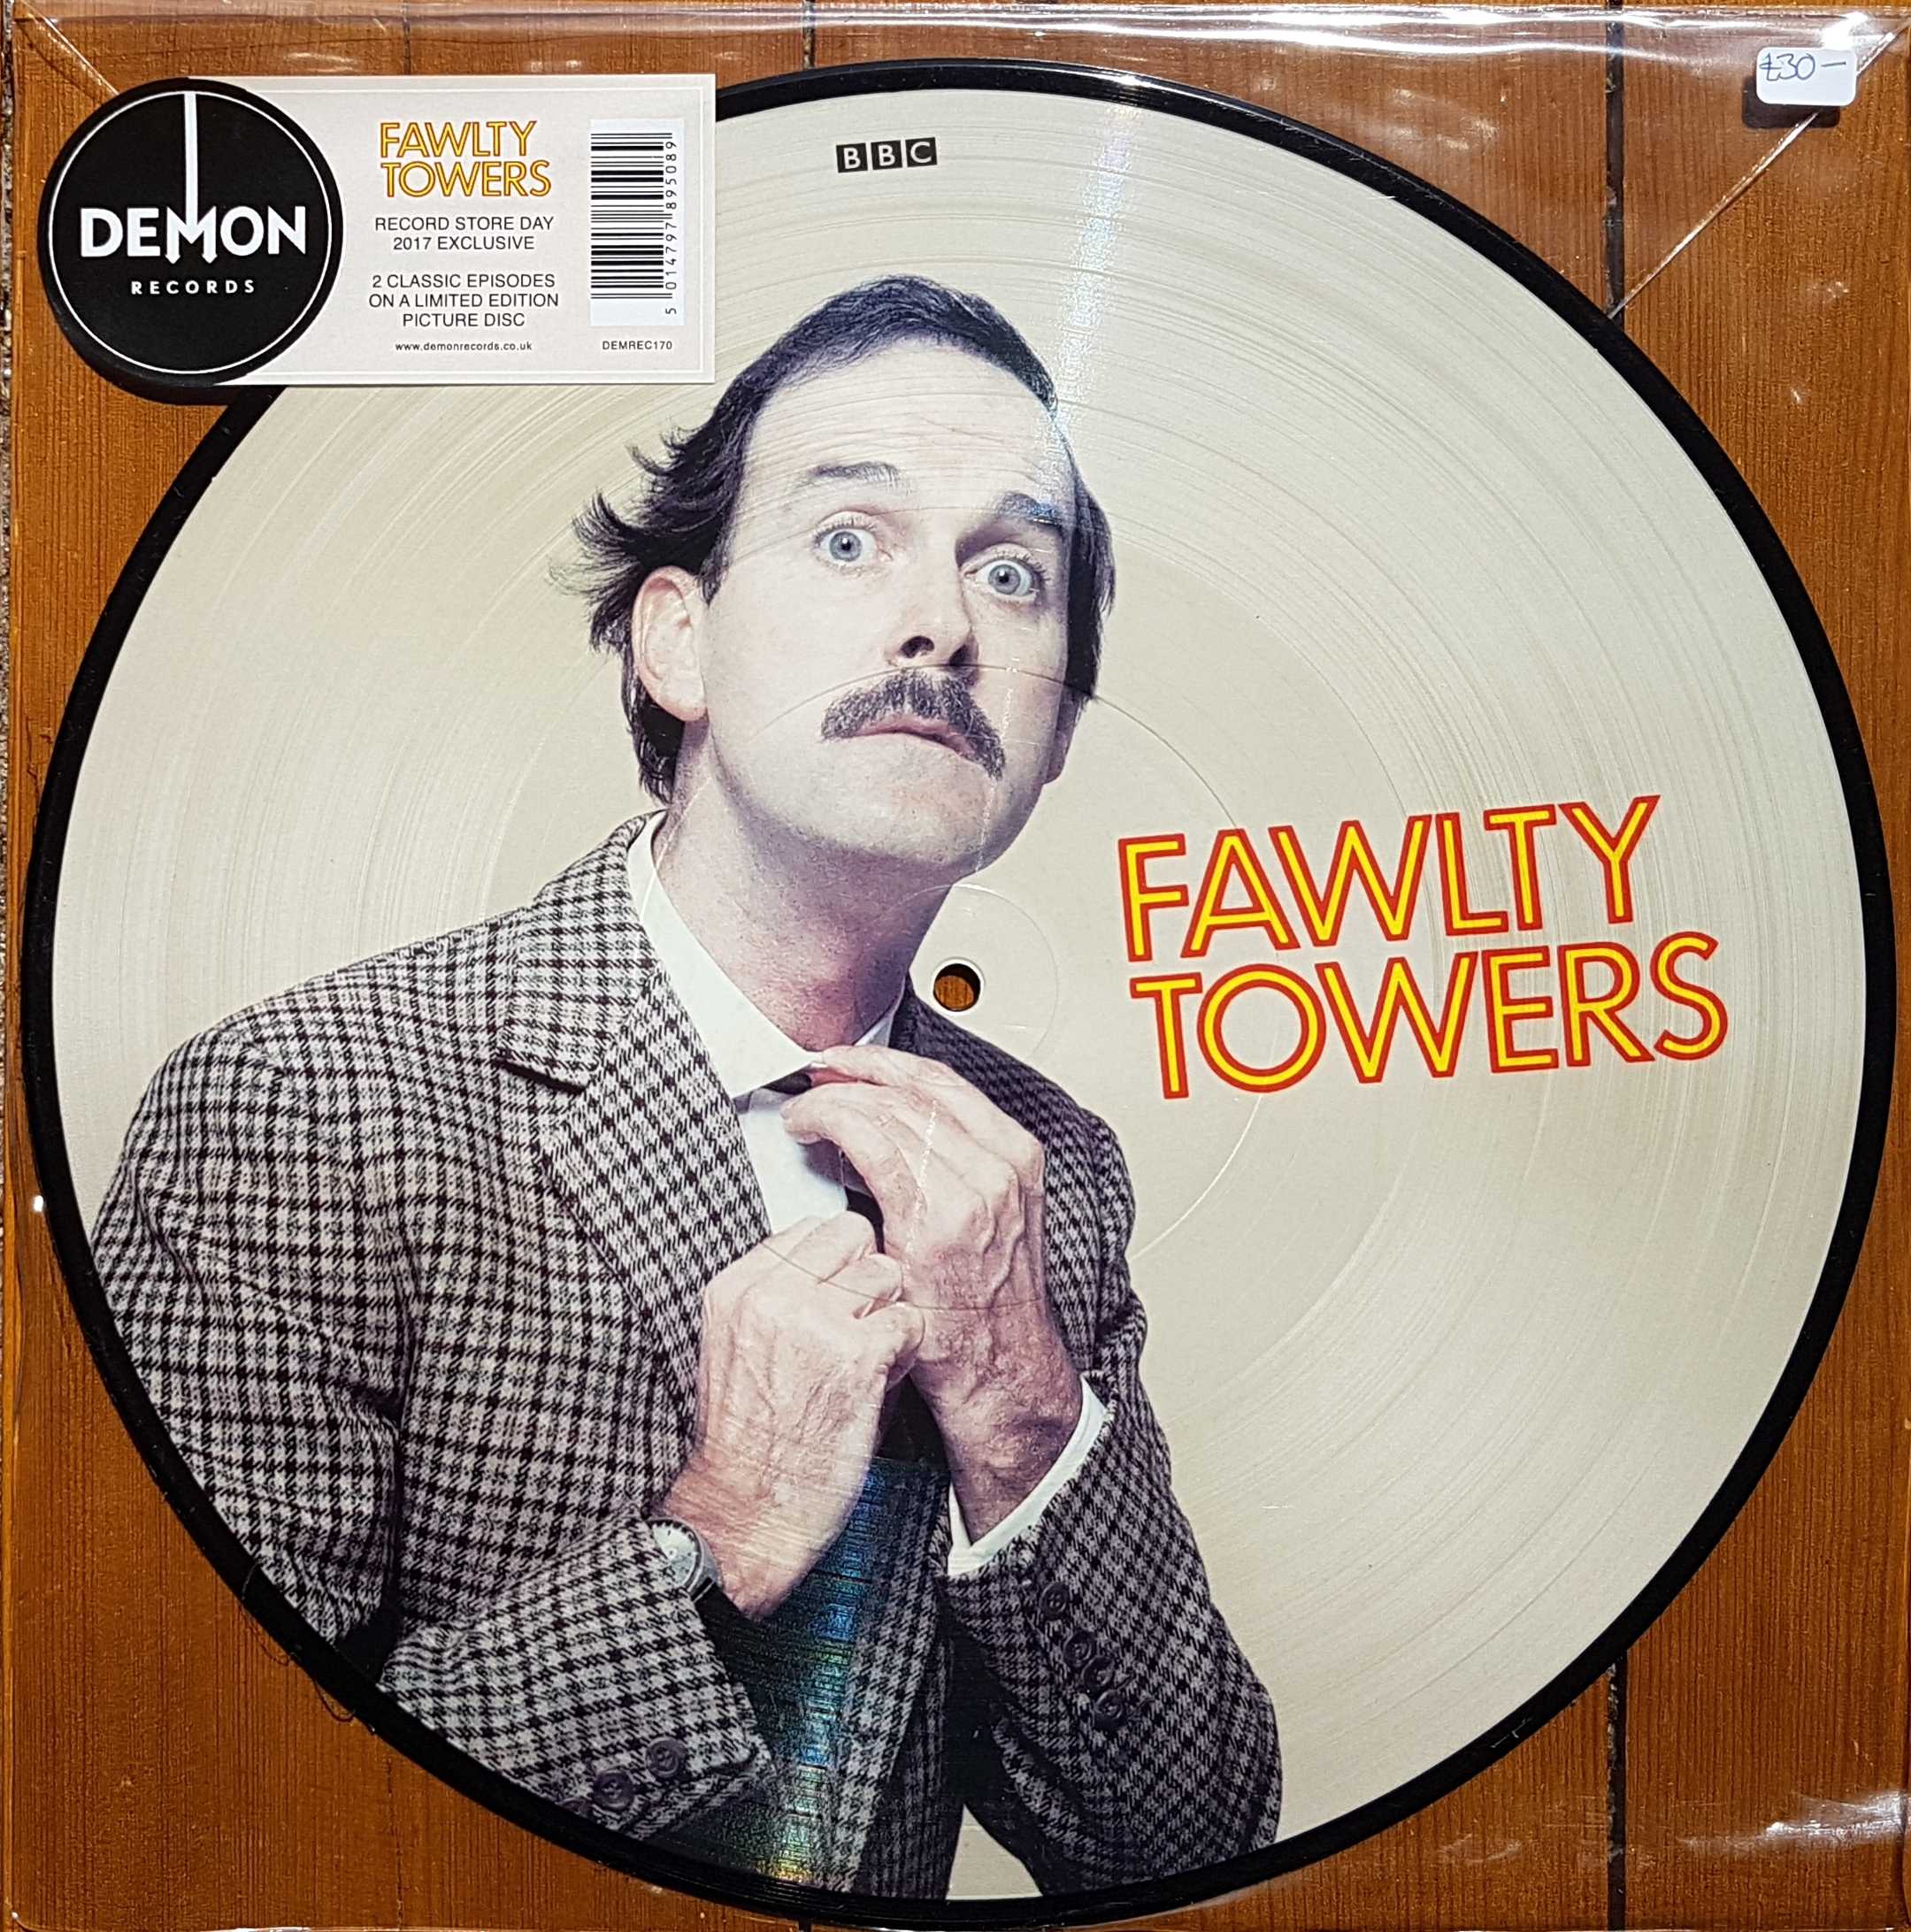 Picture of DEMREC 170 Fawlty towers - Record Store Day 2017 by artist John Cleese / Connie Booth from the BBC records and Tapes library